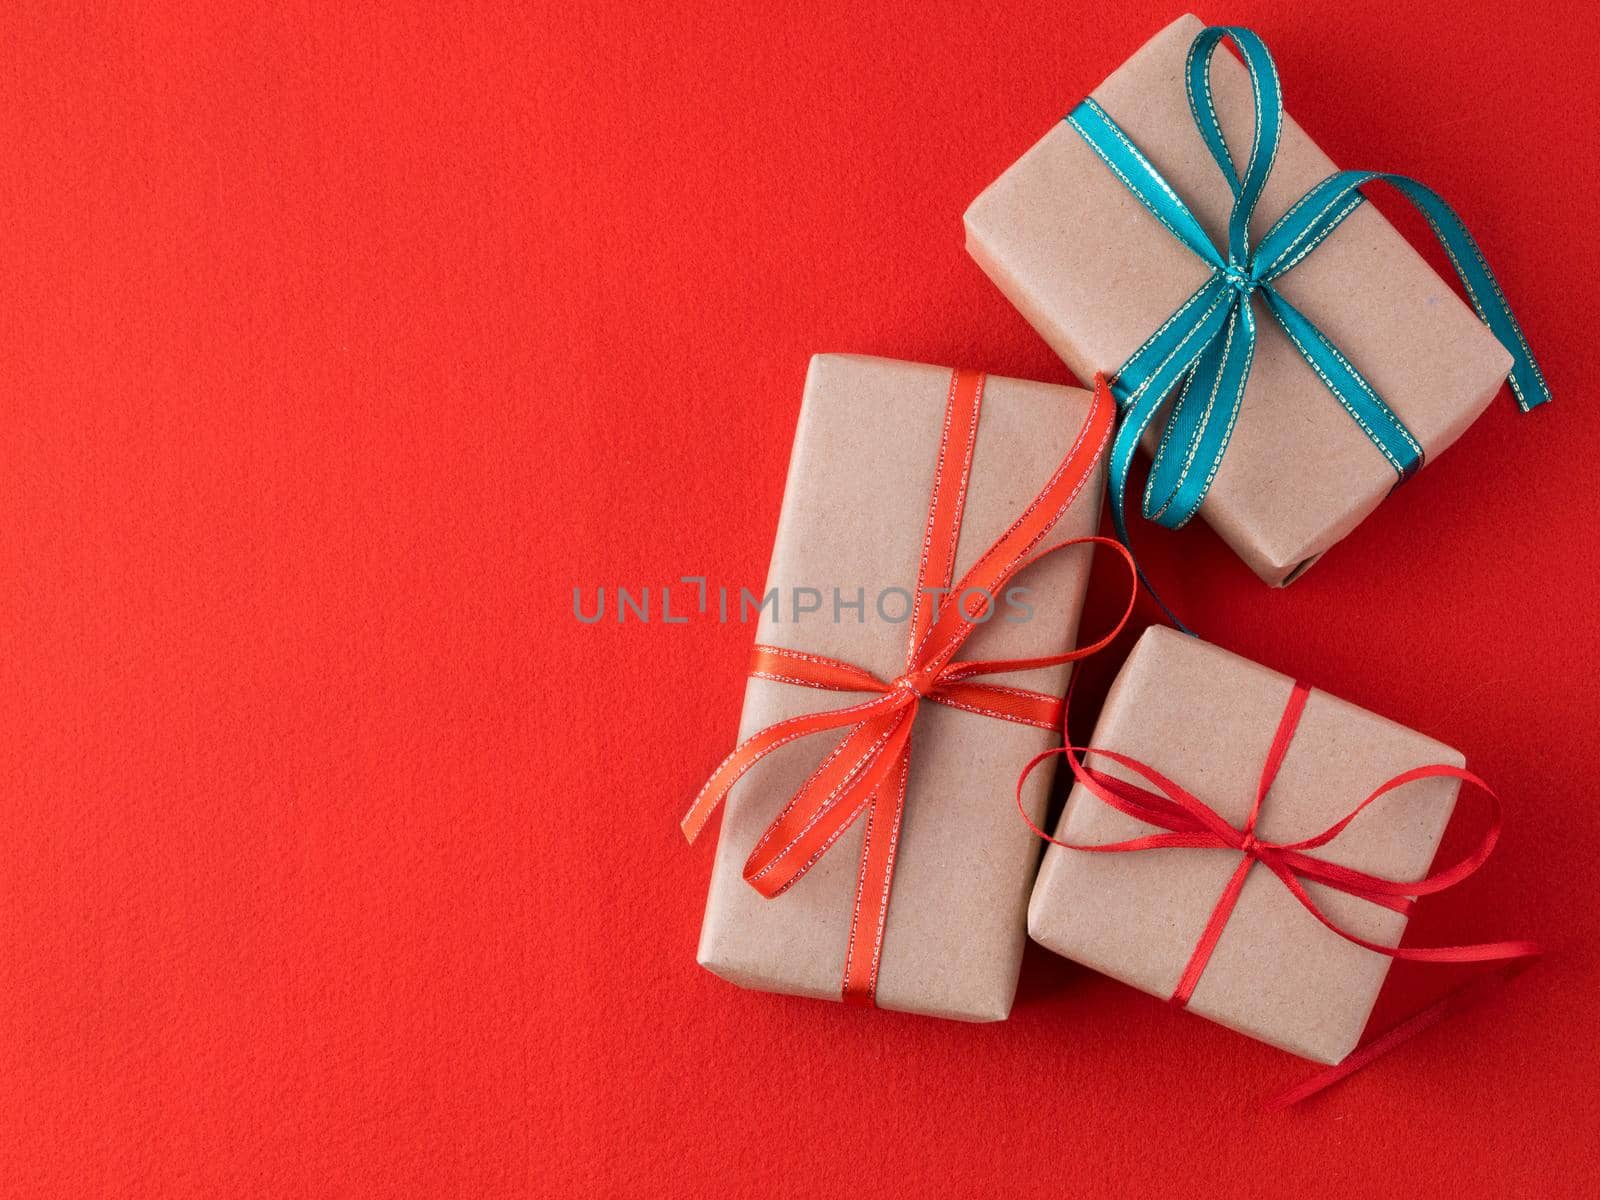 Background for Valentine's Day, birthday, holiday, shopping. Gifts from the store in a pack of Kraft brown paper with red ribbons on a bright red background